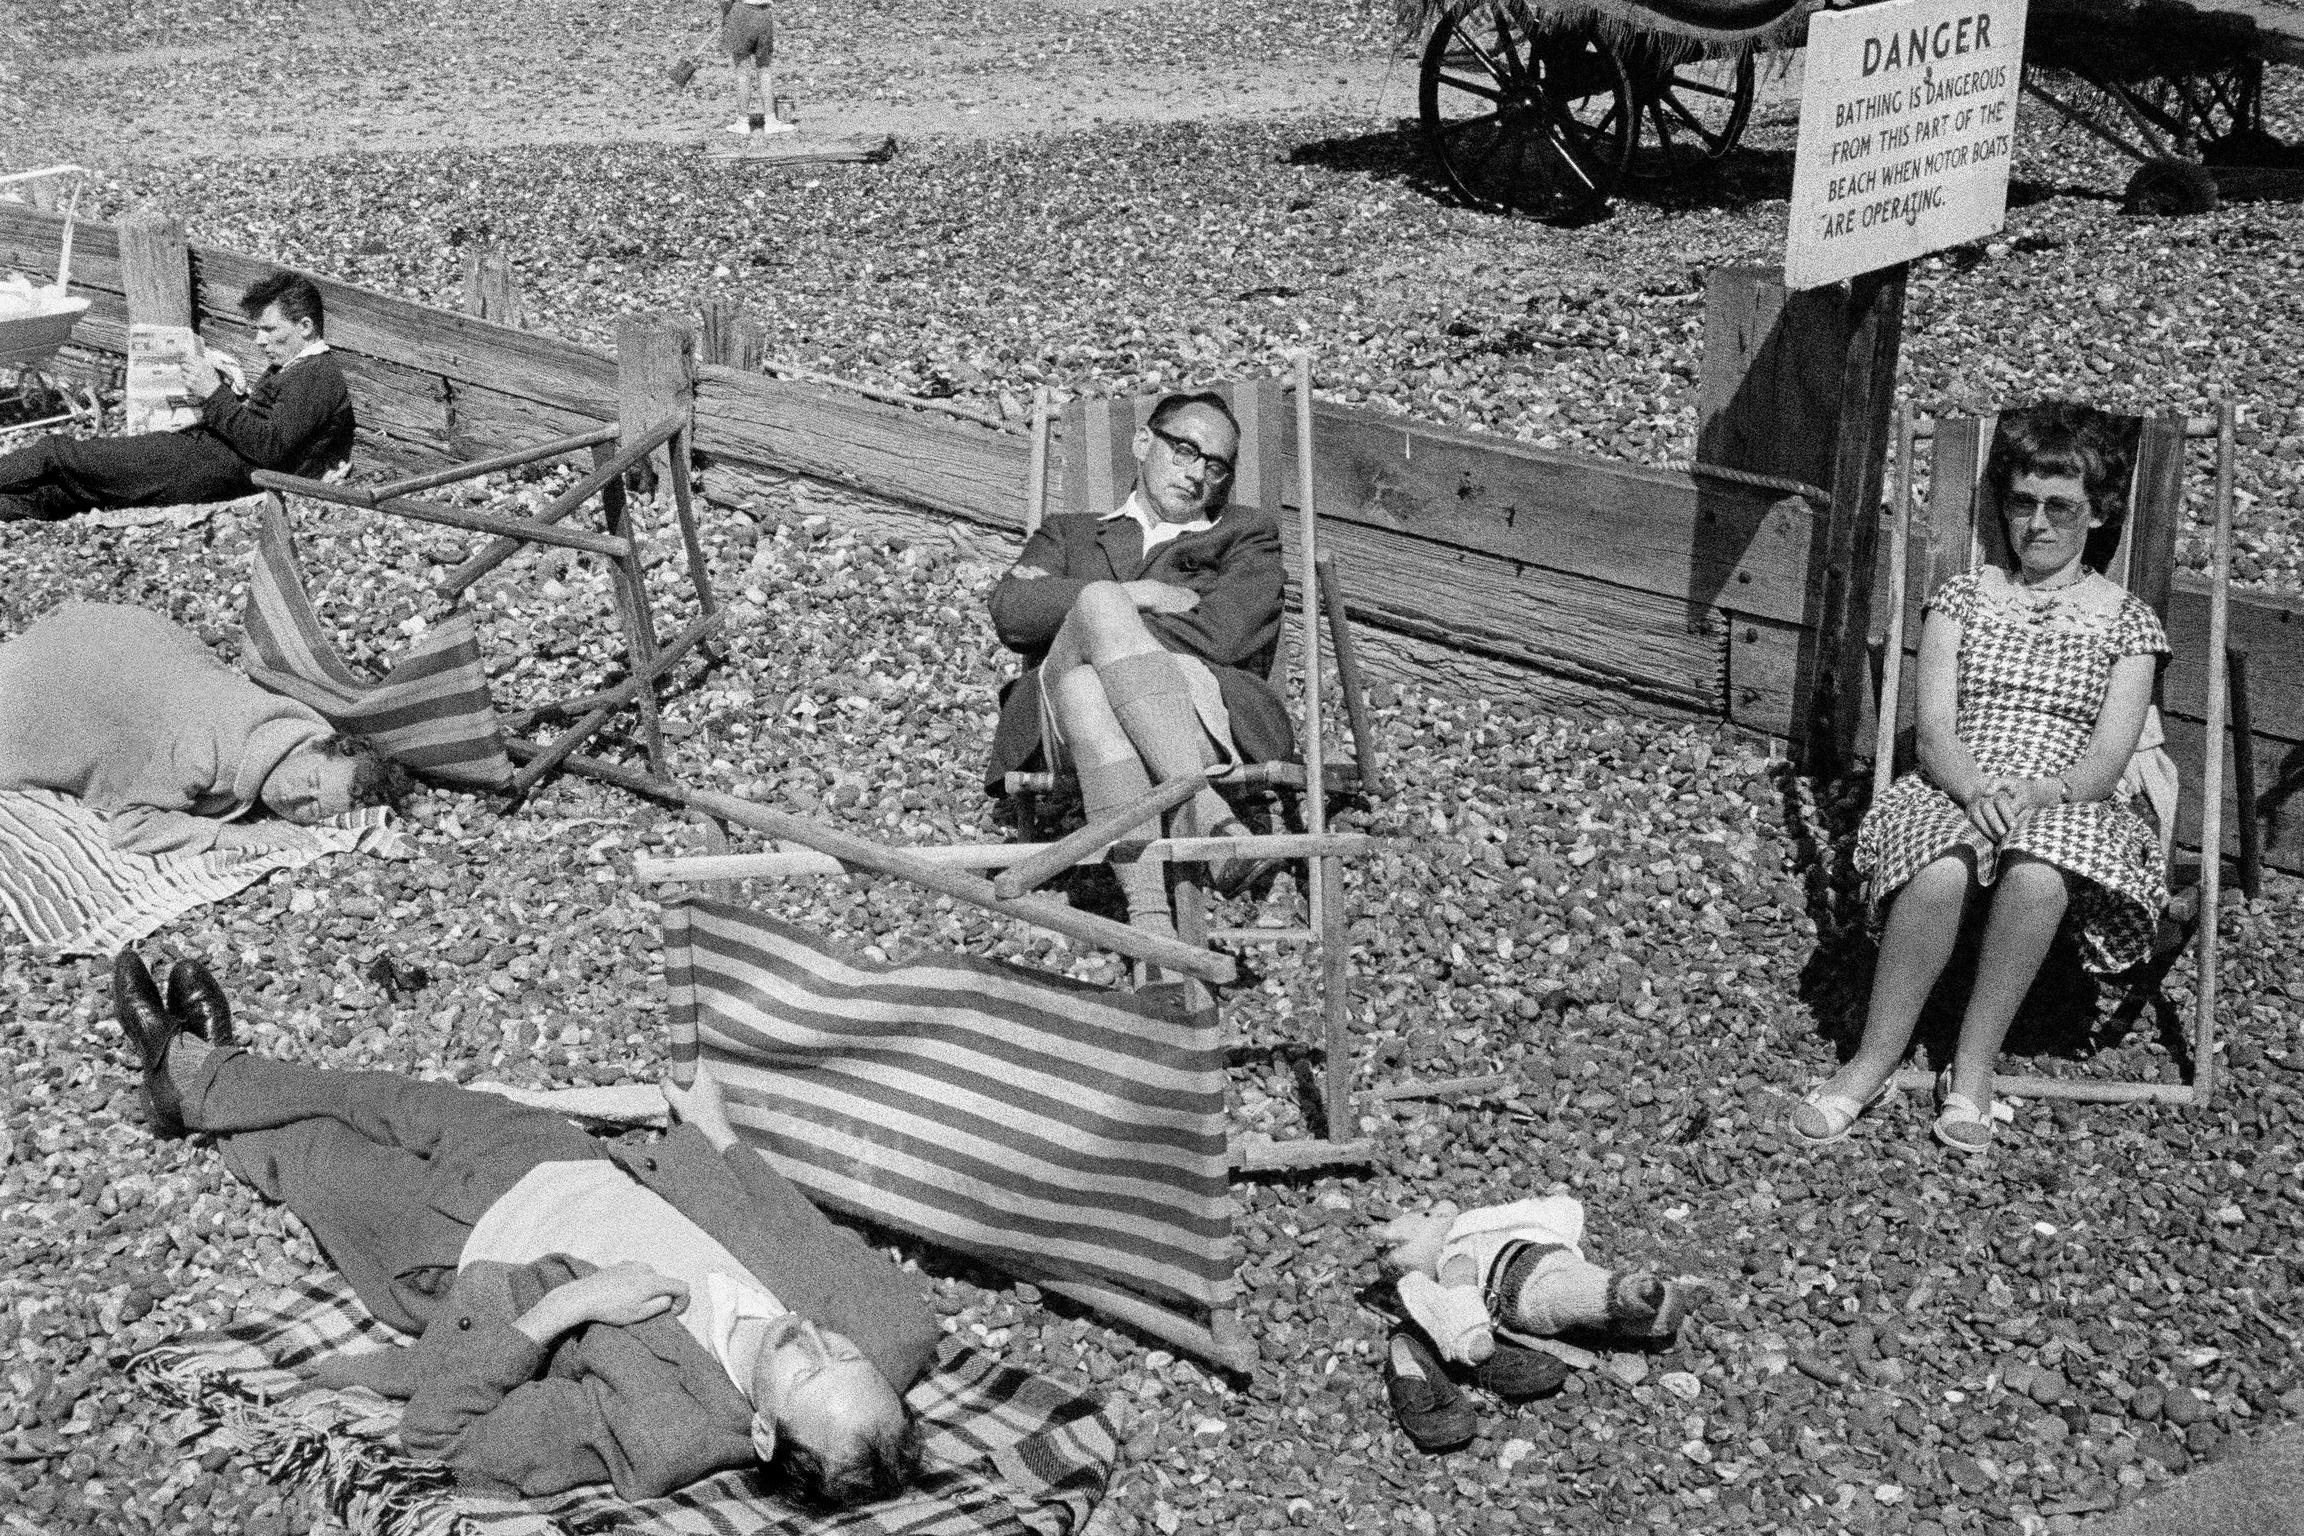 Seaside holiday resort of mainly the working classes. Herne Bay, UK